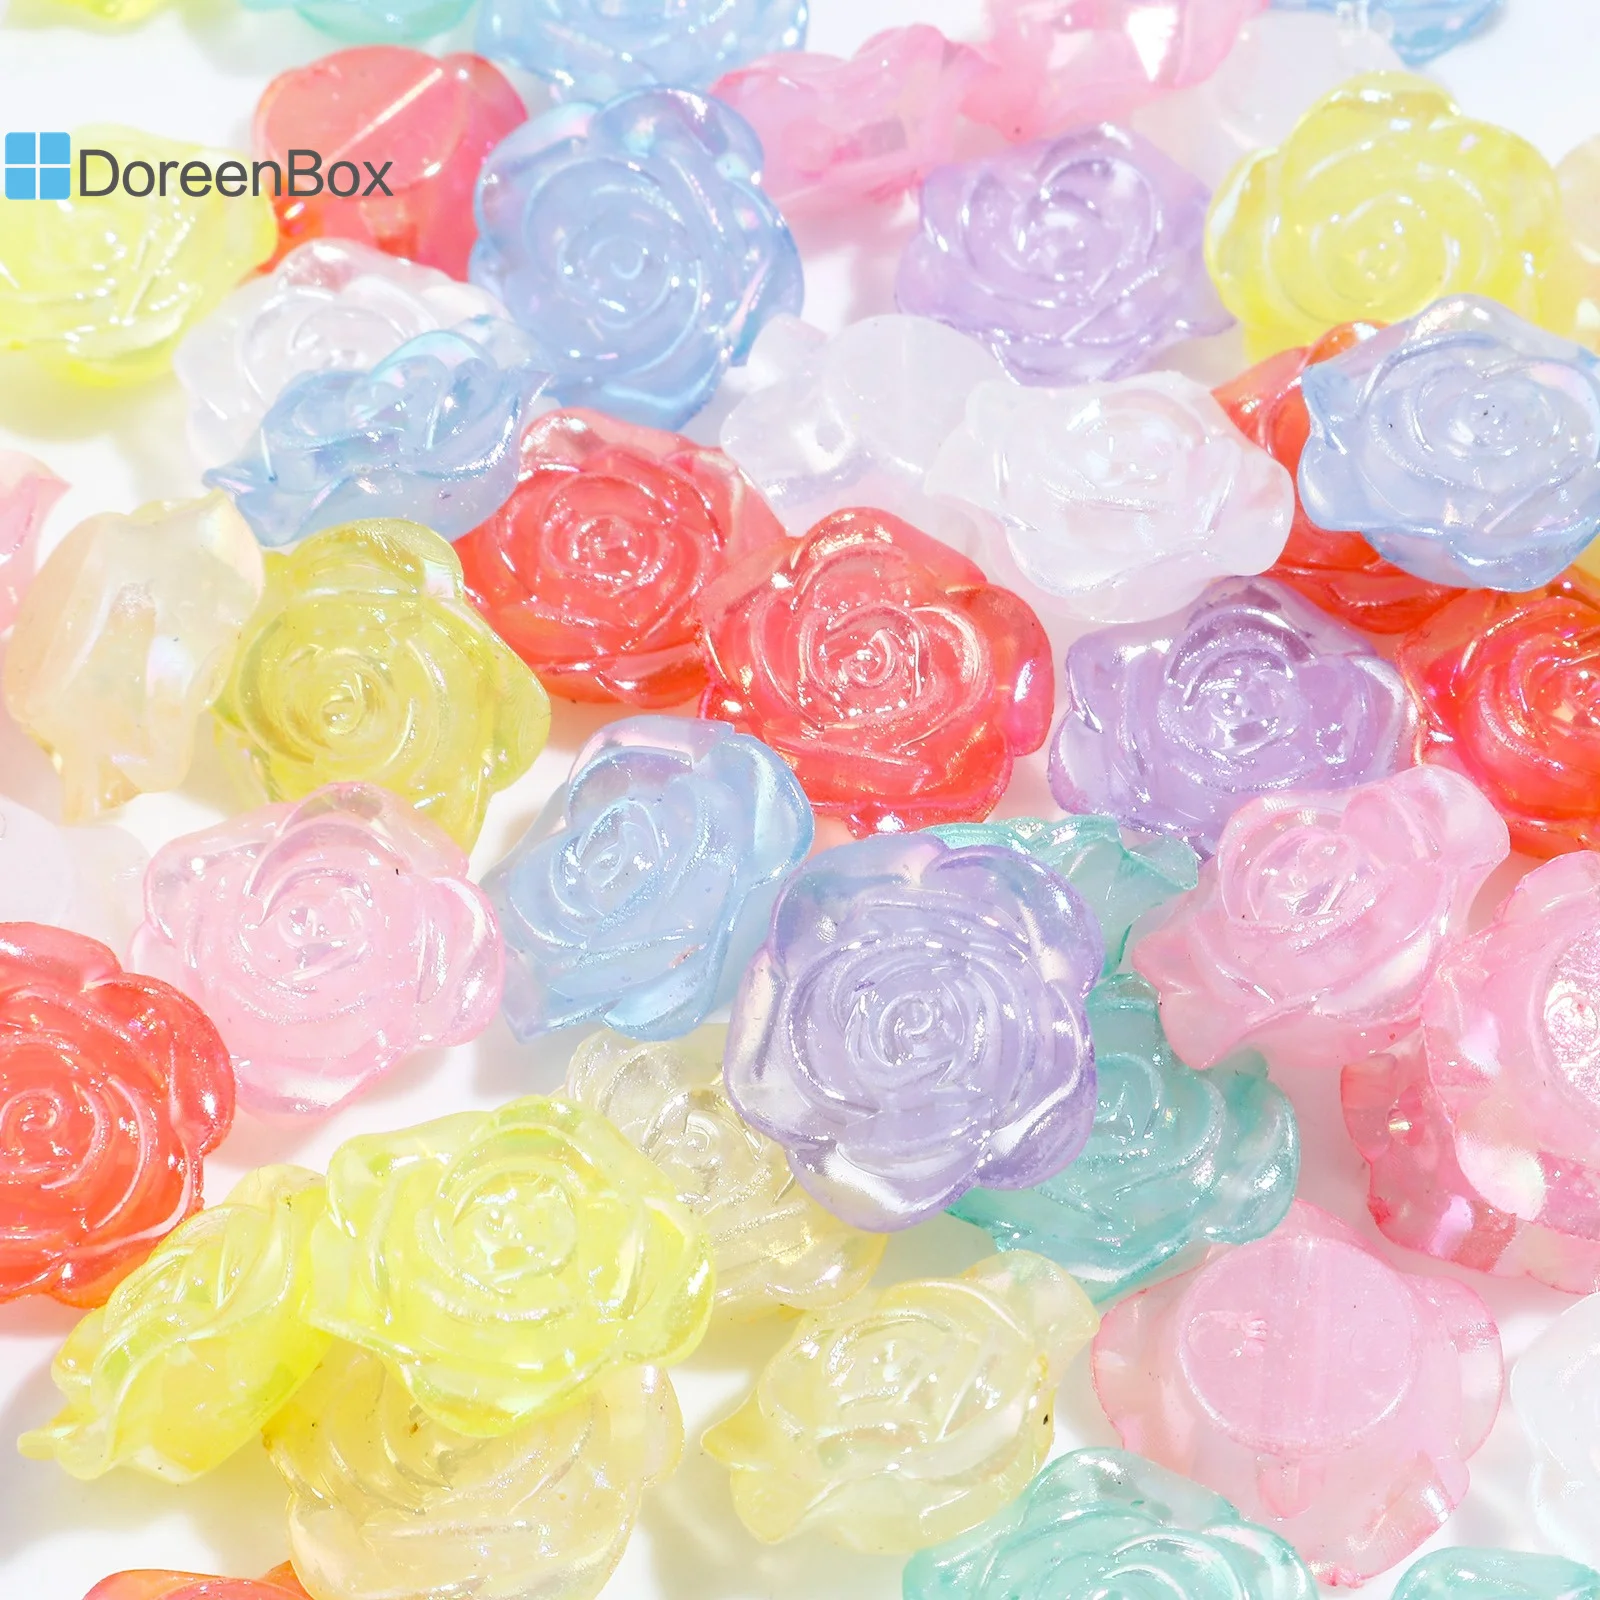 

100PCs Fashion Rose Flower Acrylic Beads At Random Color Pearlized Loose Spacer Beads DIY Making Necklace Jewelry 19mm x 18mm